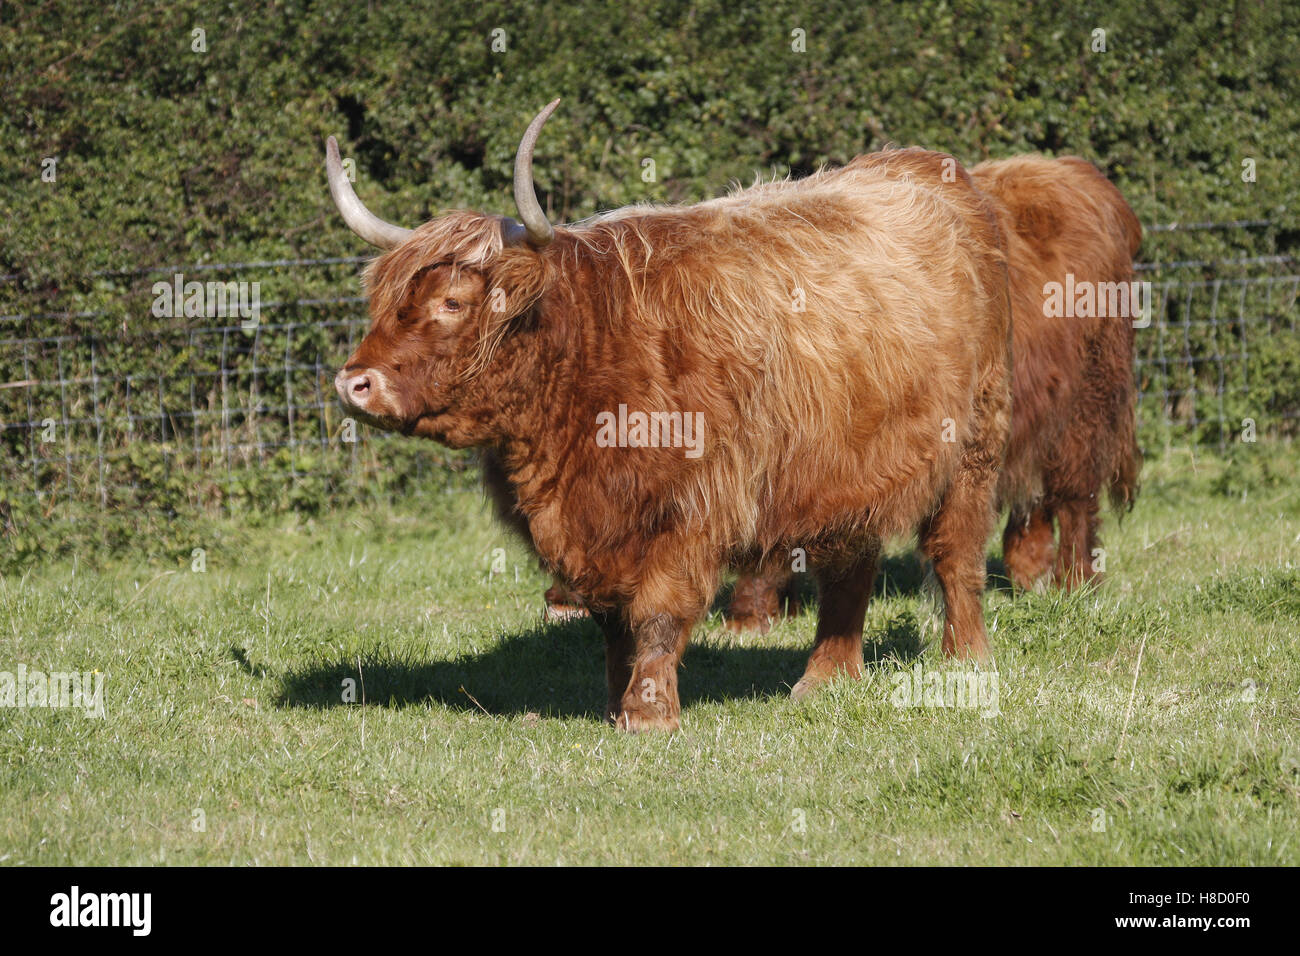 Shetland Aberdeen Angus cattle in field Banque D'Images